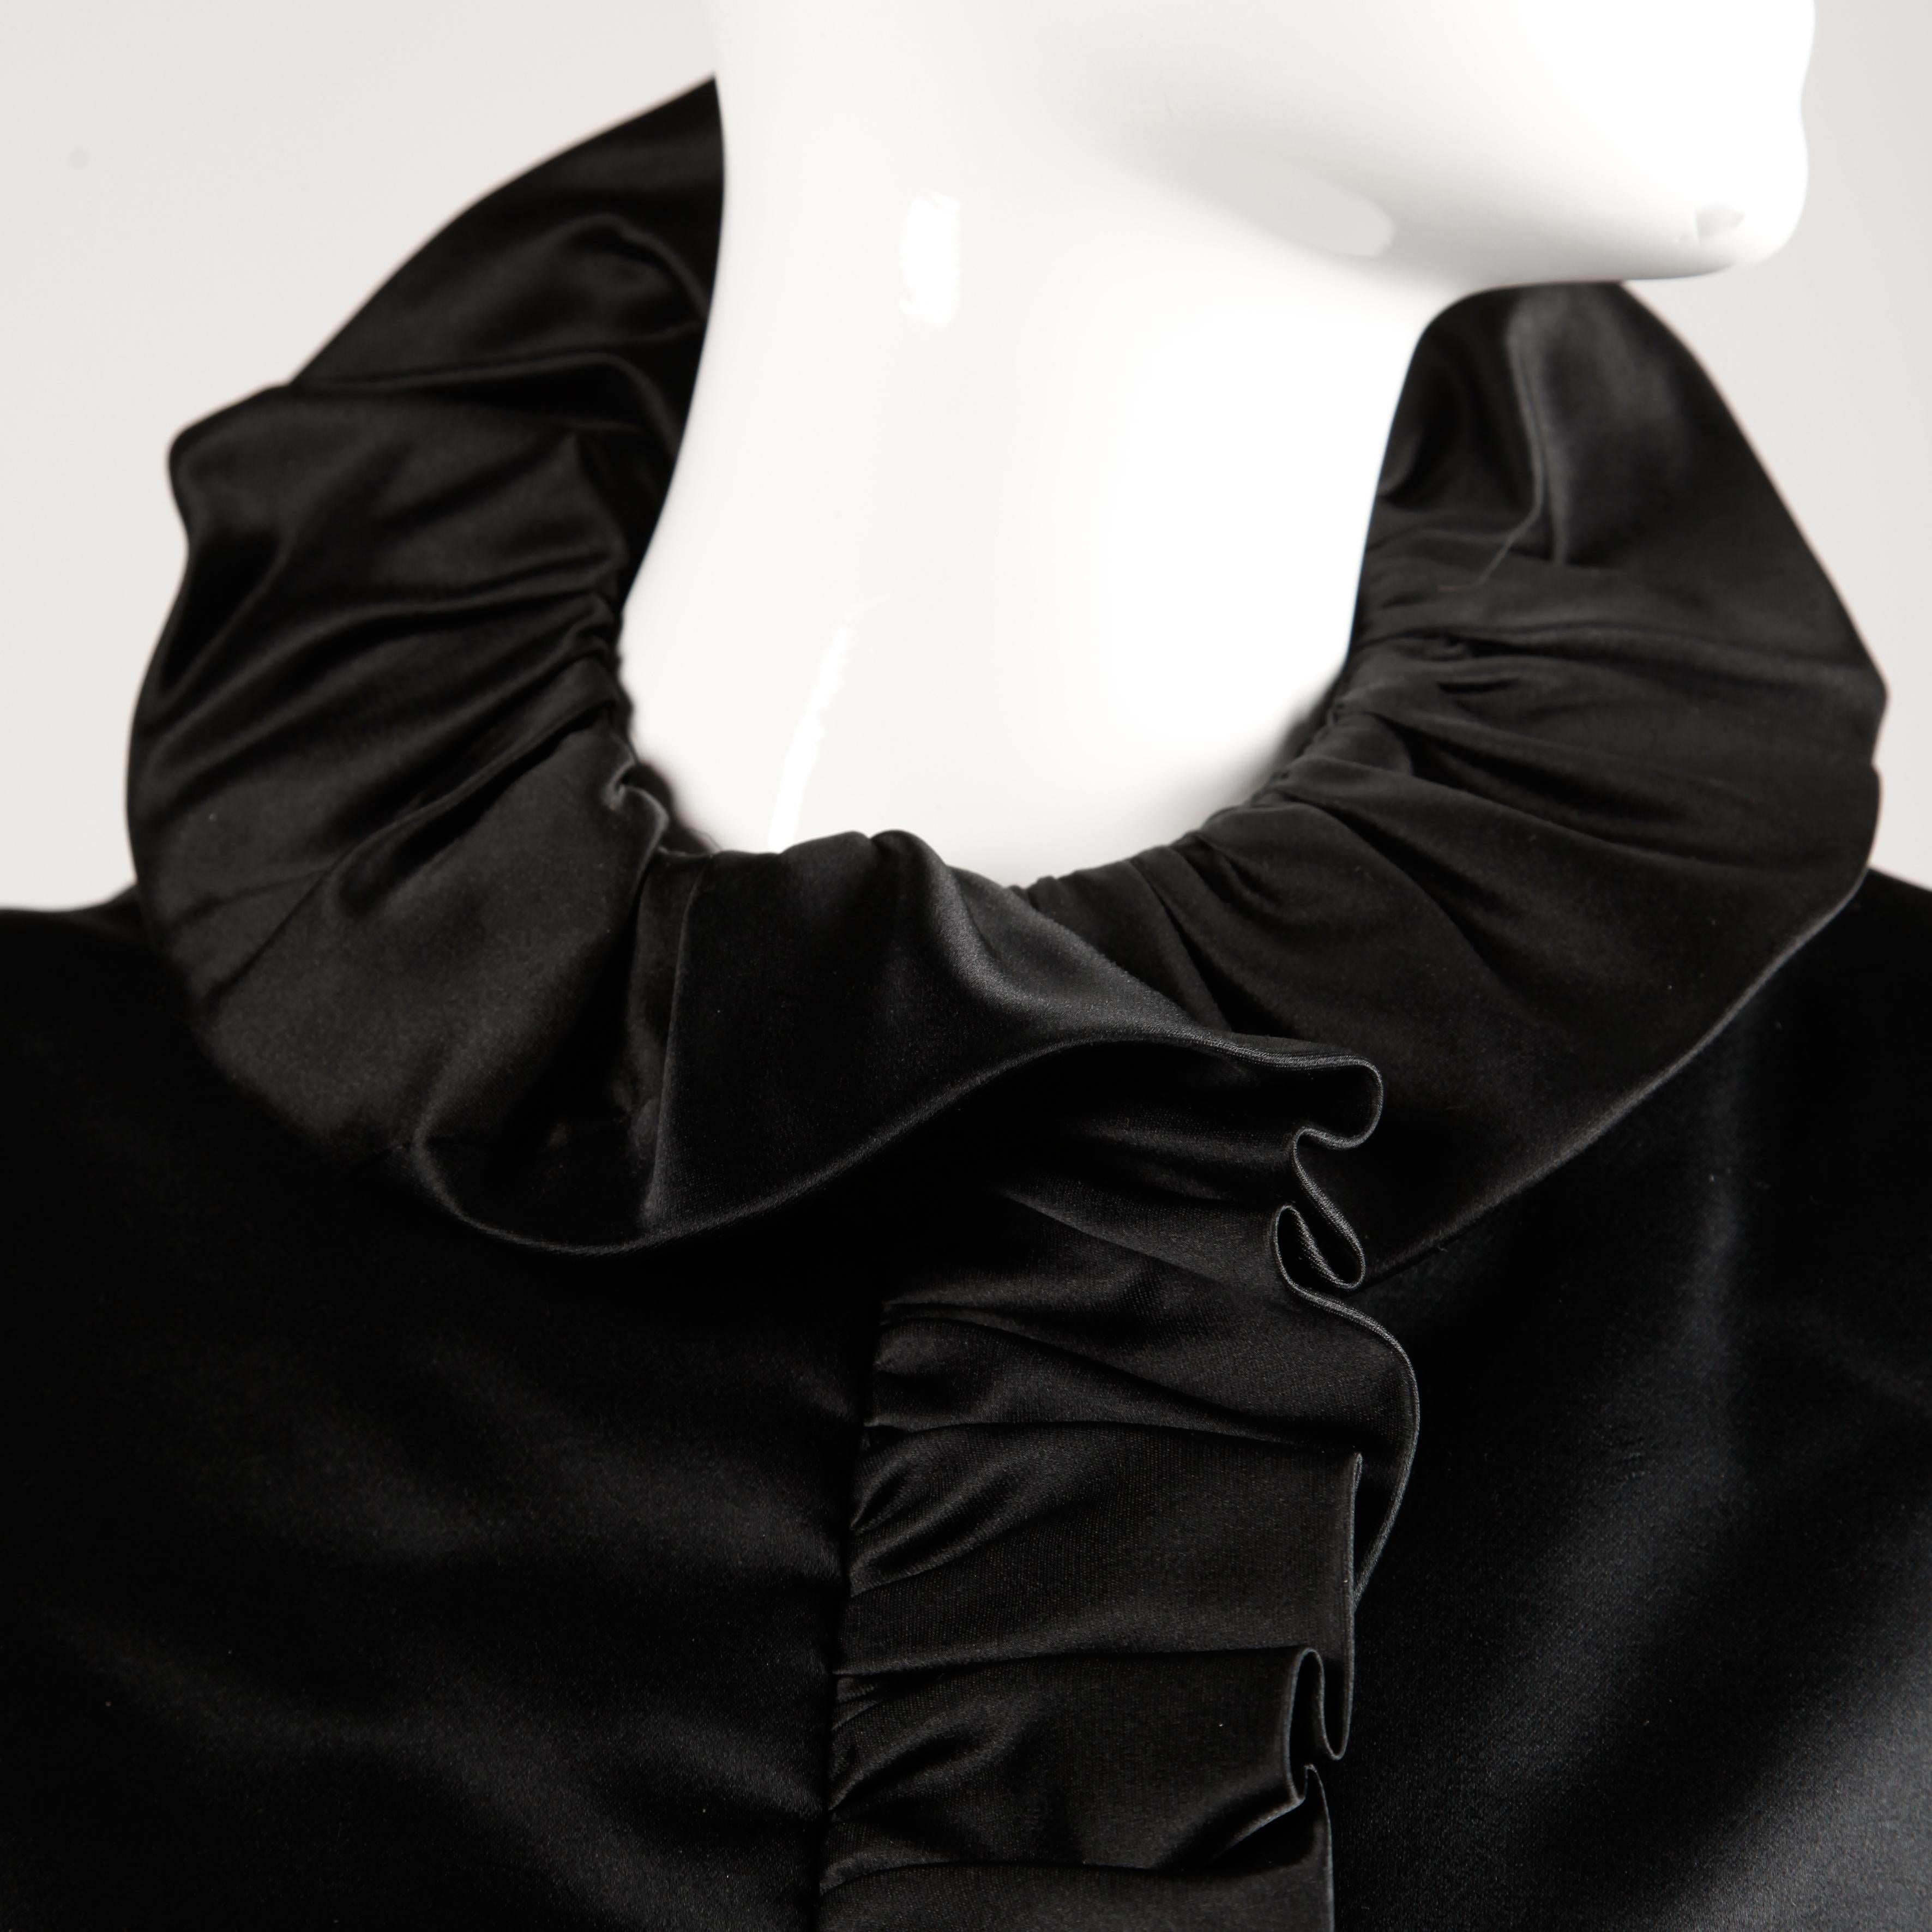 Michael Novarese Vintage 1970s Black Silk Satin Evening Jacket with Ruffle In Excellent Condition For Sale In Sparks, NV